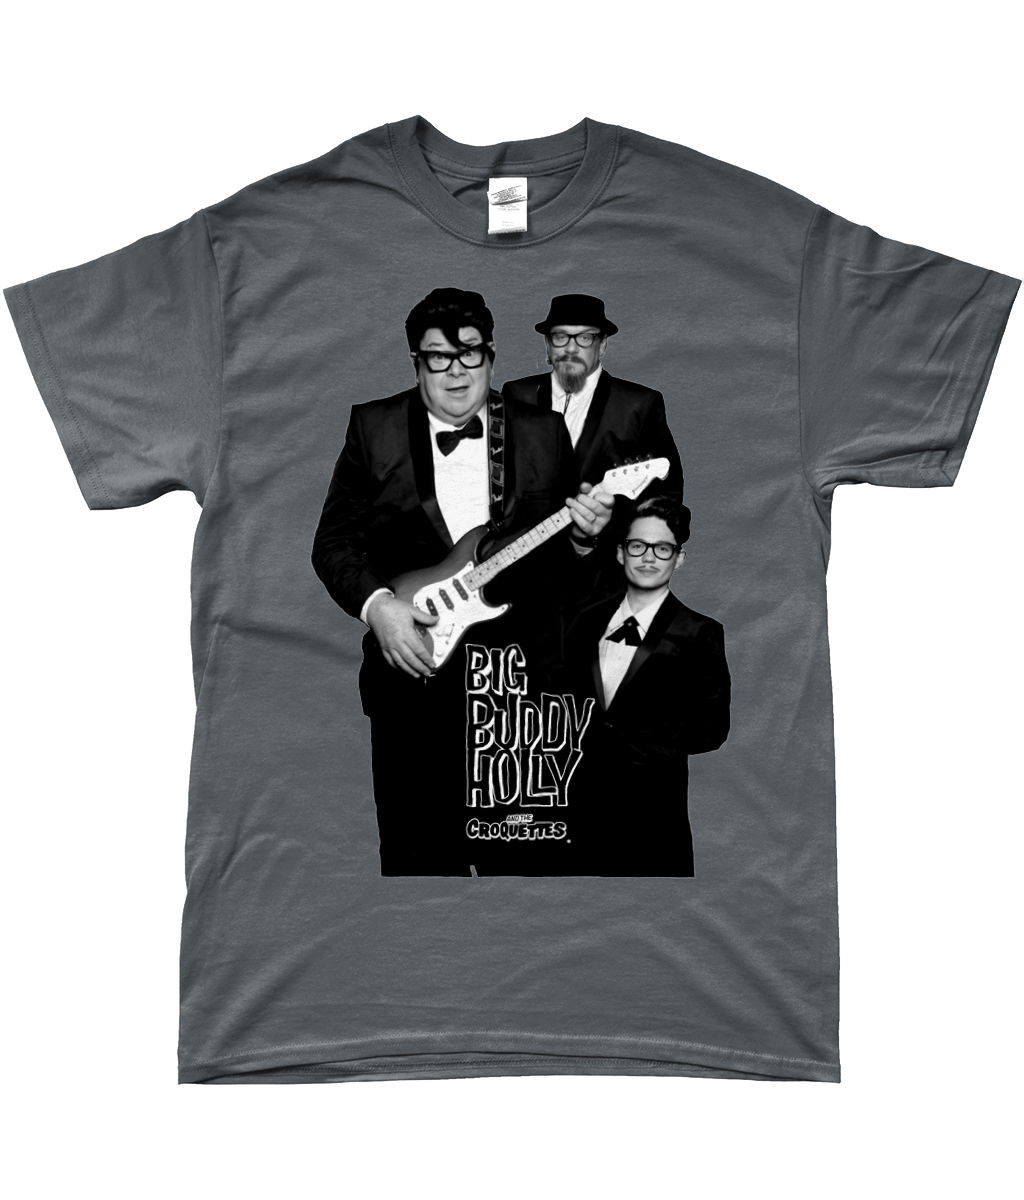 Big Buddy Holly & The Croquettes Band